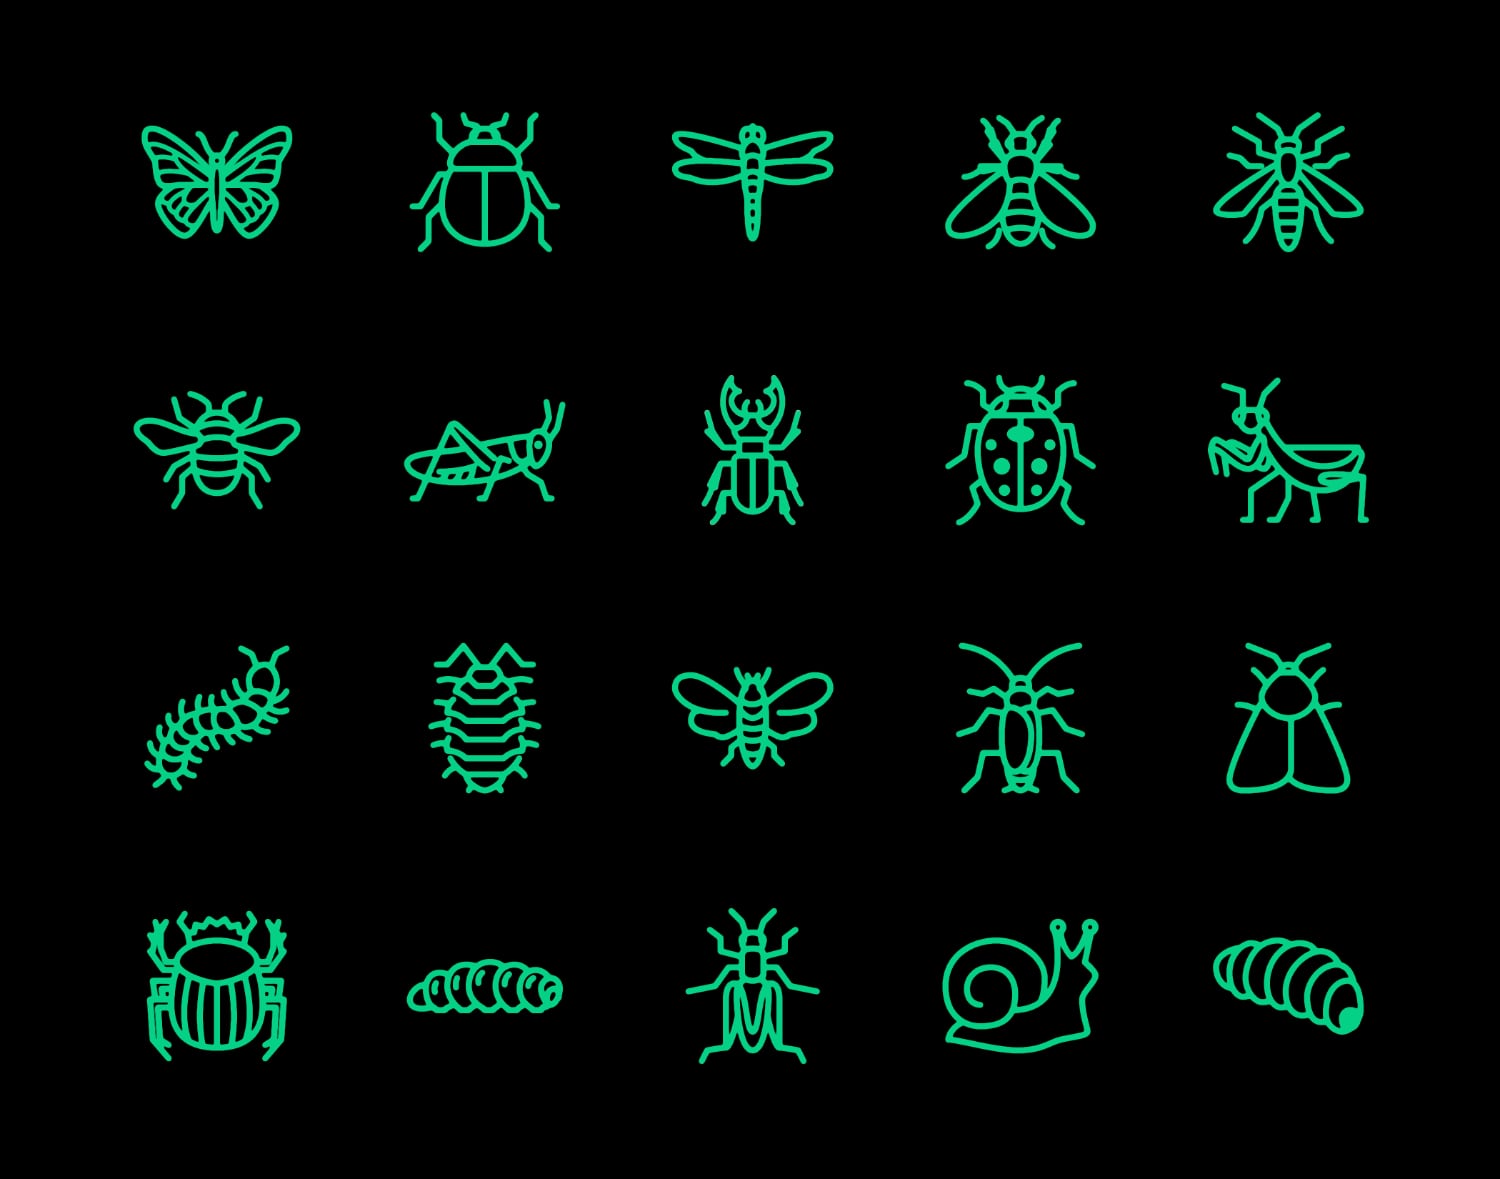 Illustrations of various insects.